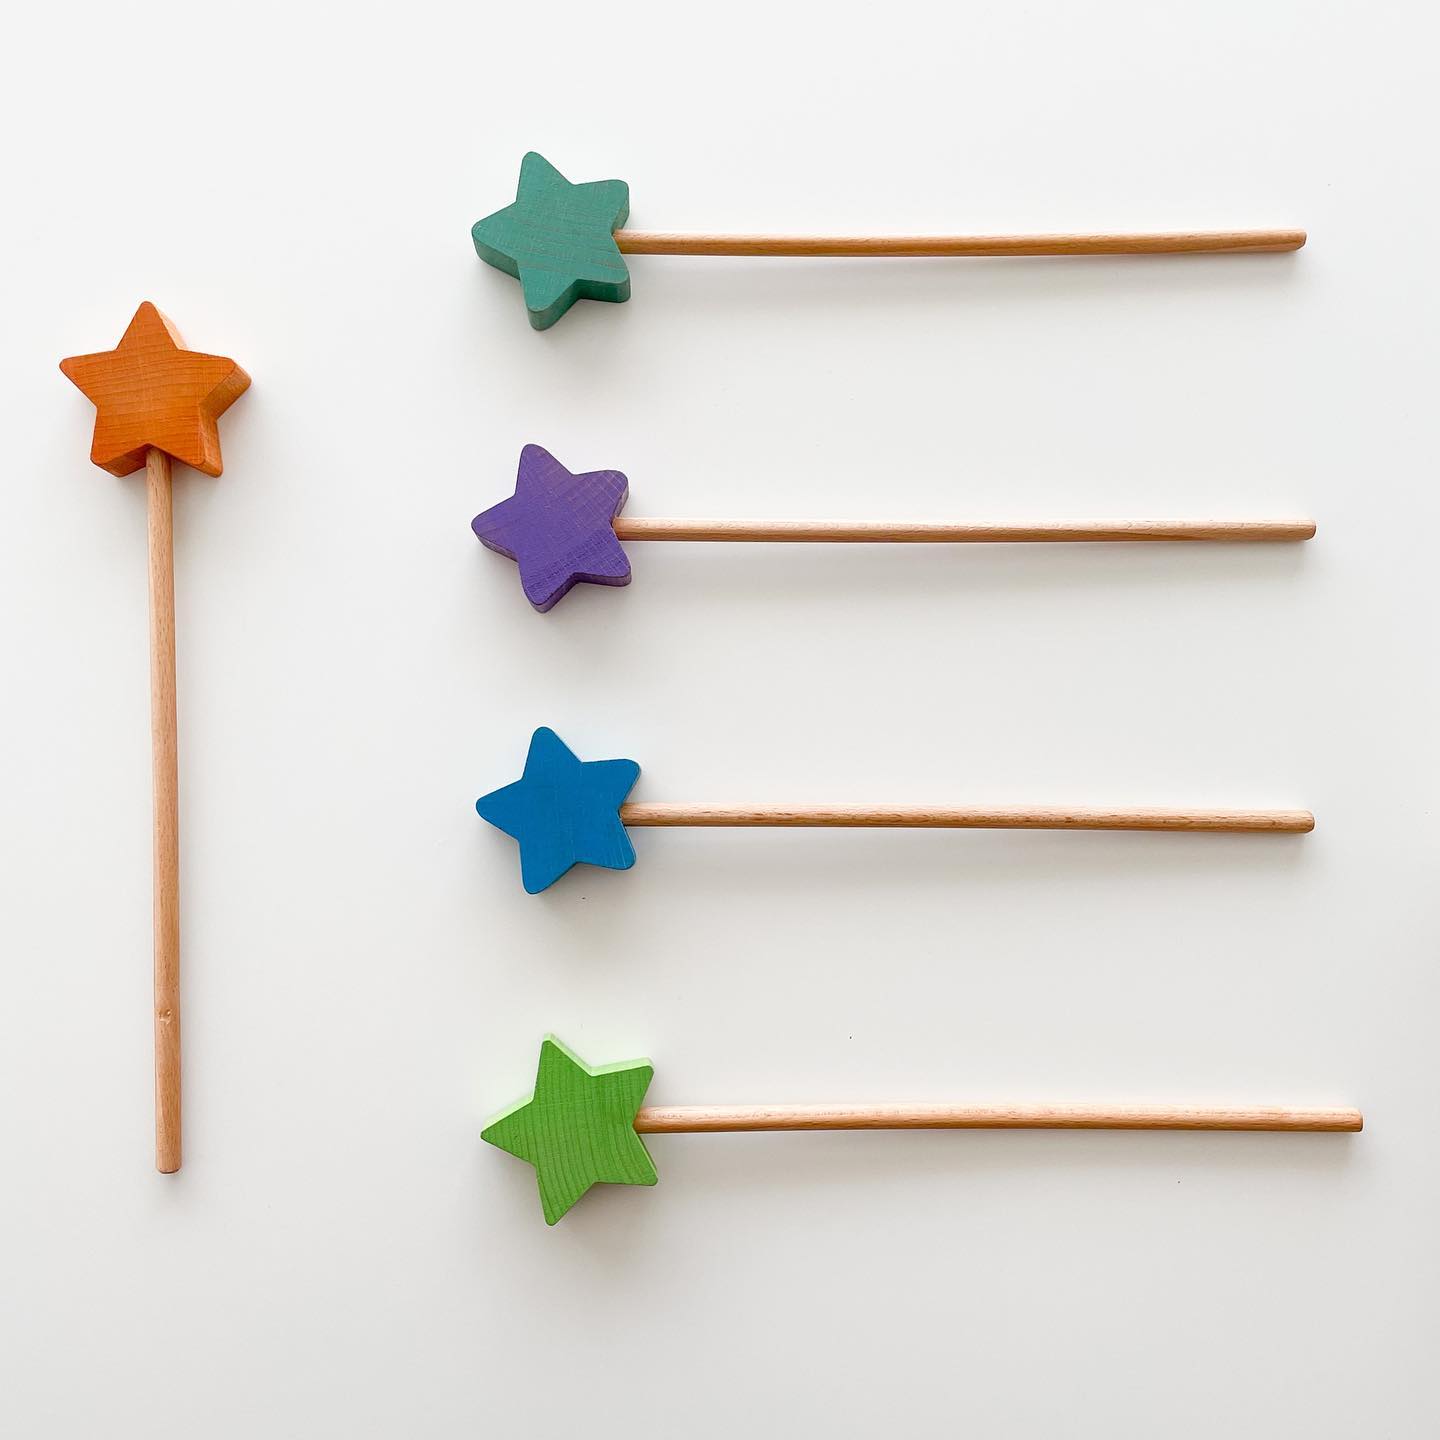 Dowel Rods Wood Sticks for Crafts – MIOUMEI